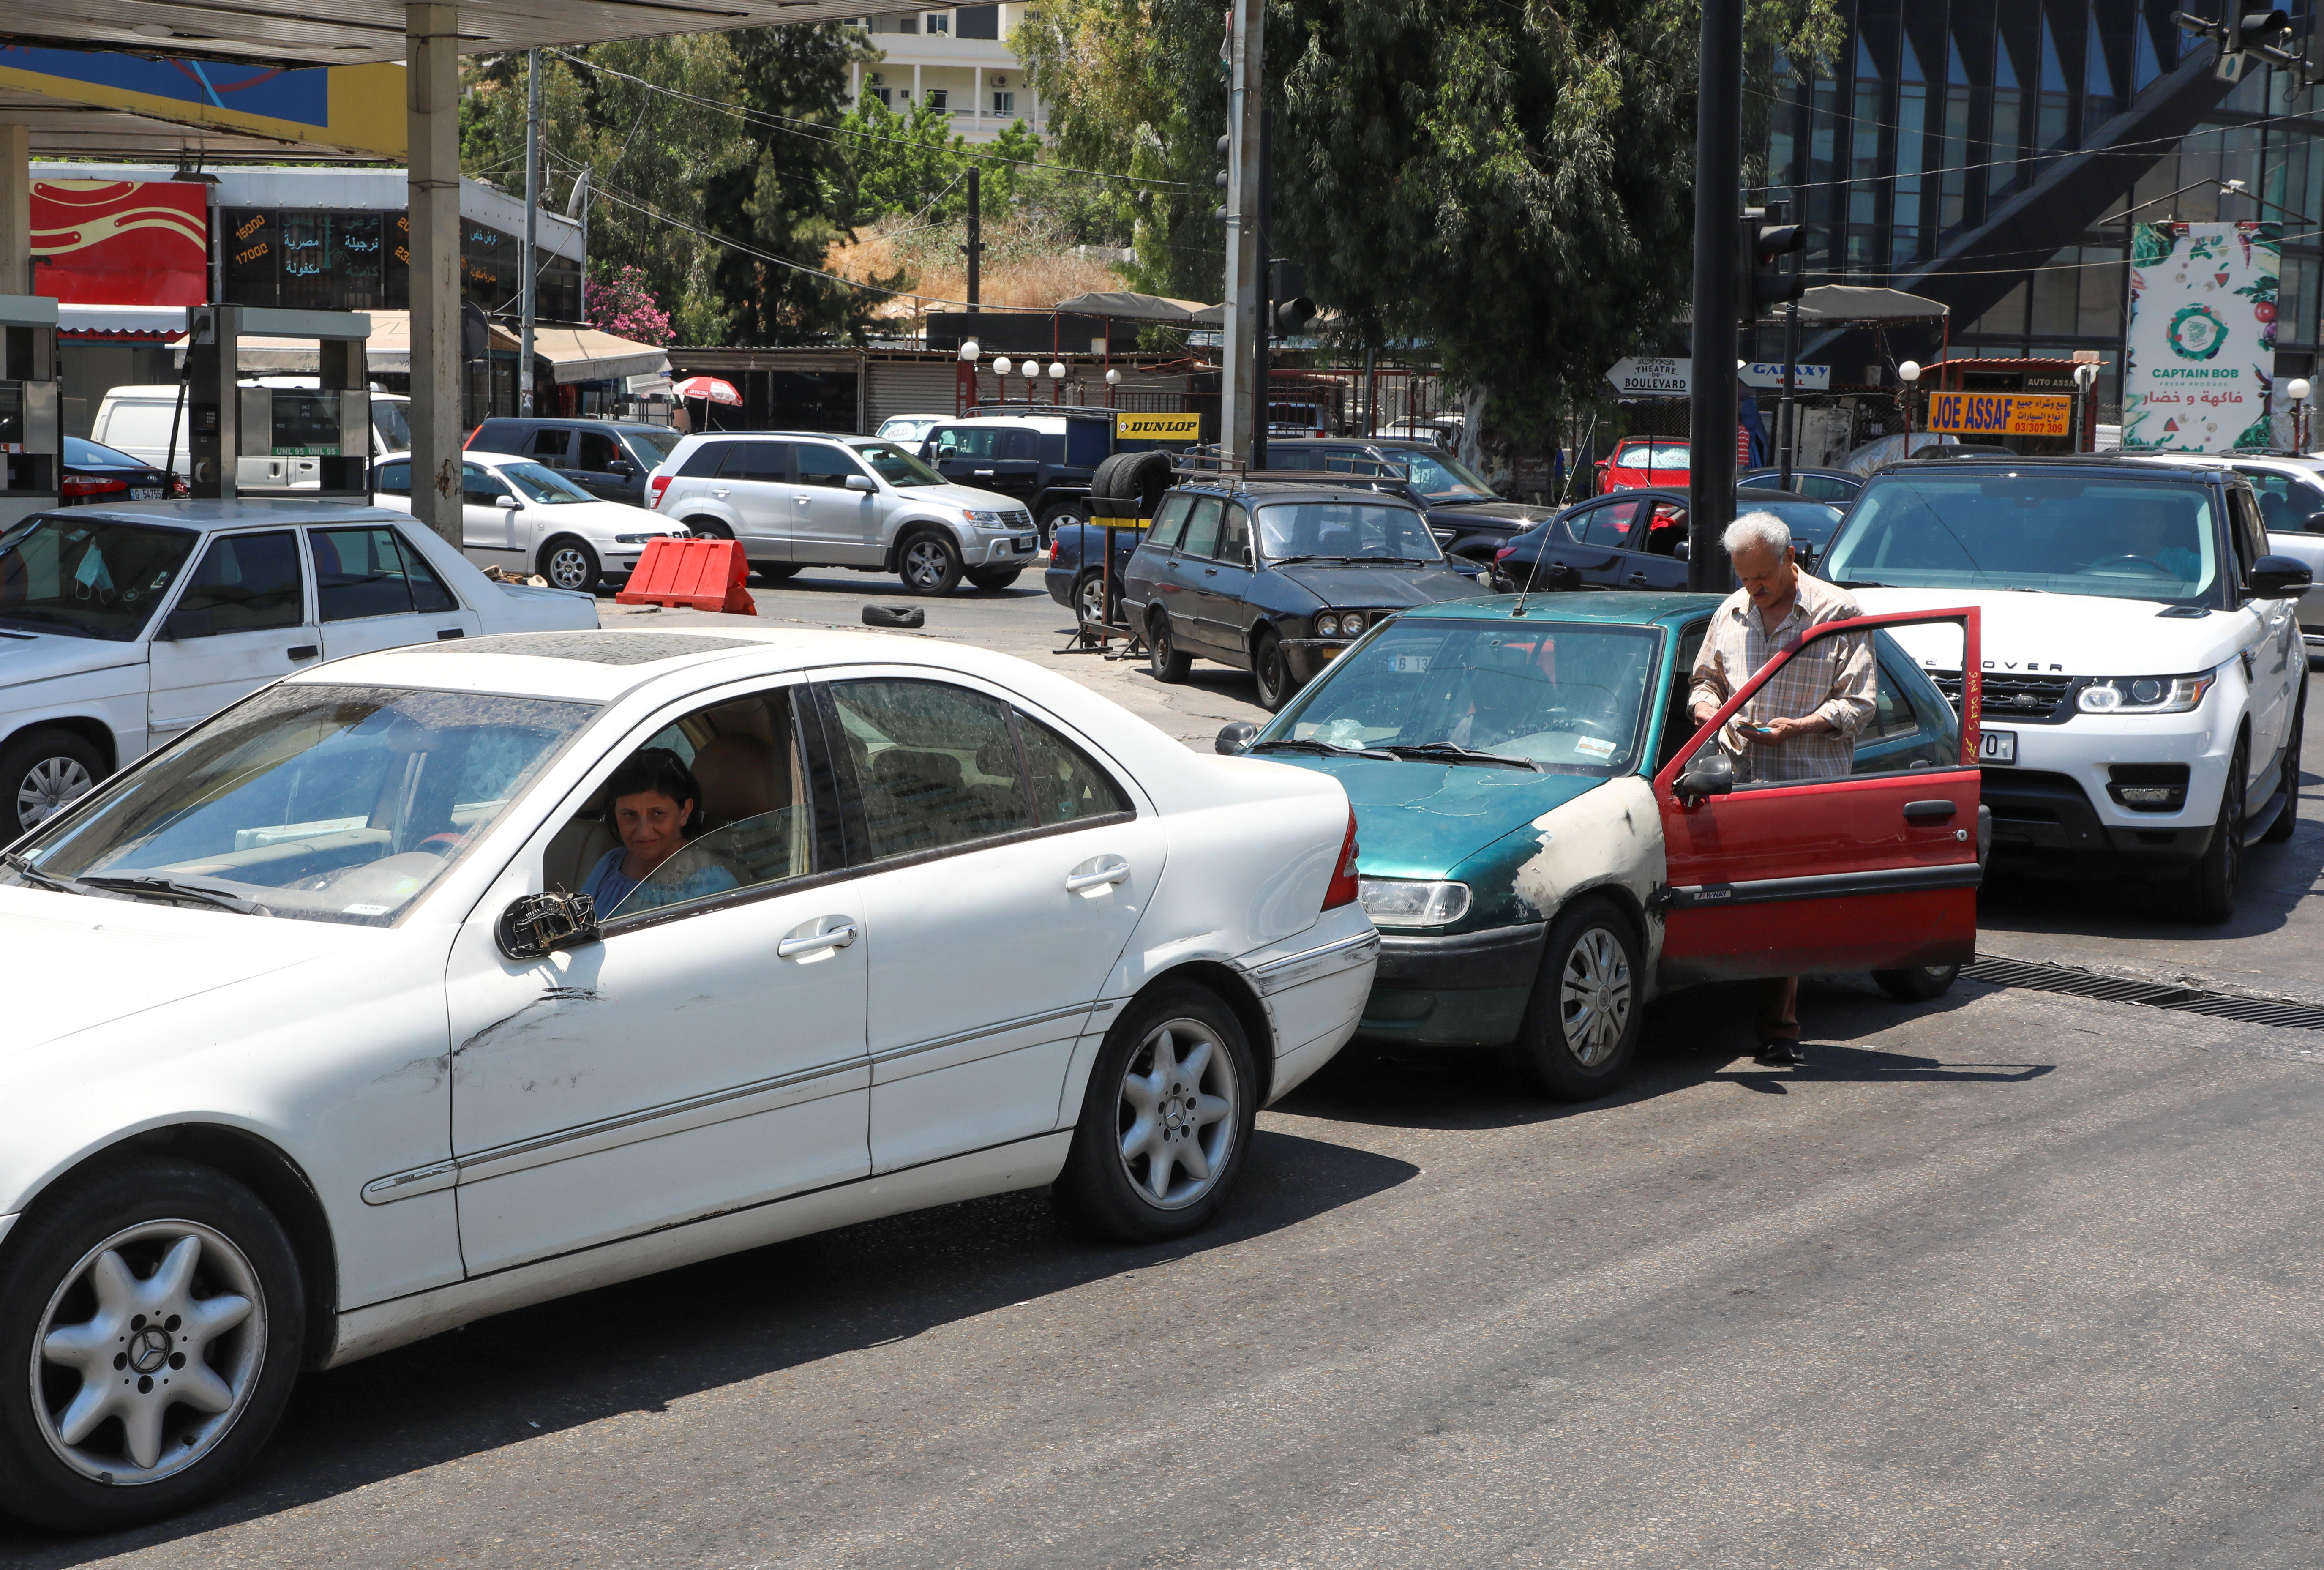 Cars wait in line for fuel at a gas station in Beirut